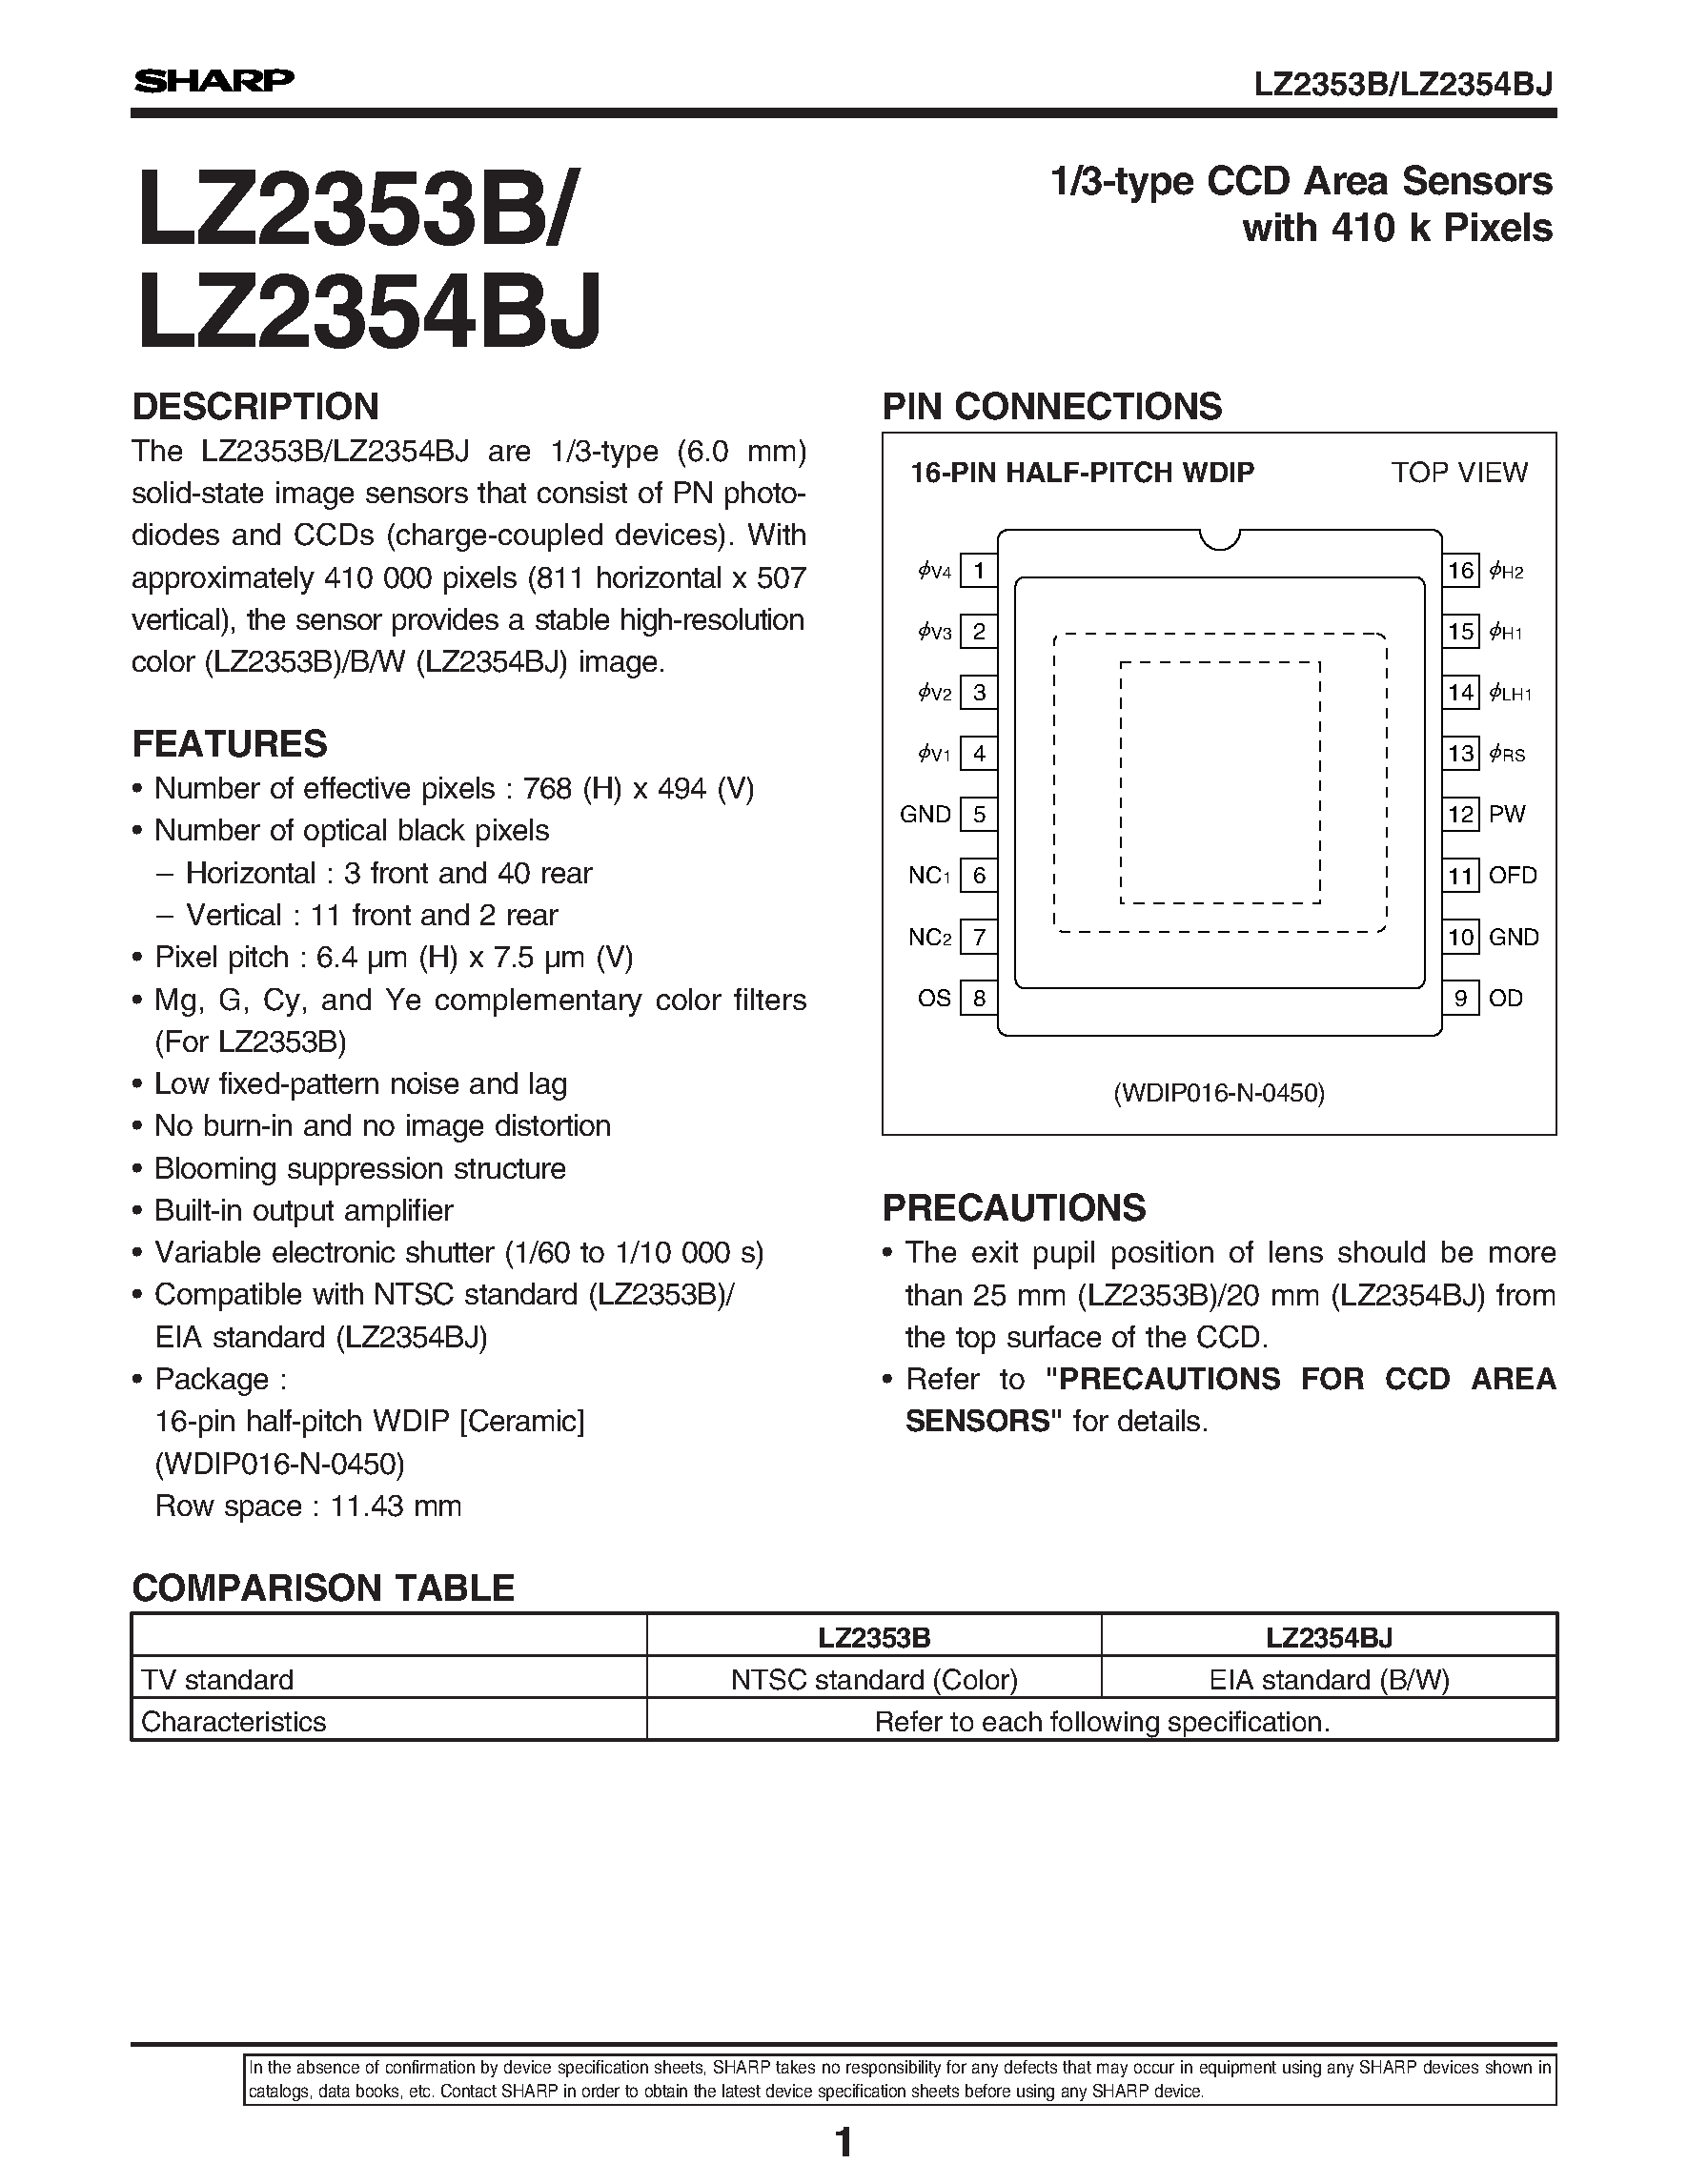 Datasheet LZ2354BJ - 1/3-type CCD Area Sensors with 410 k Pixels page 1